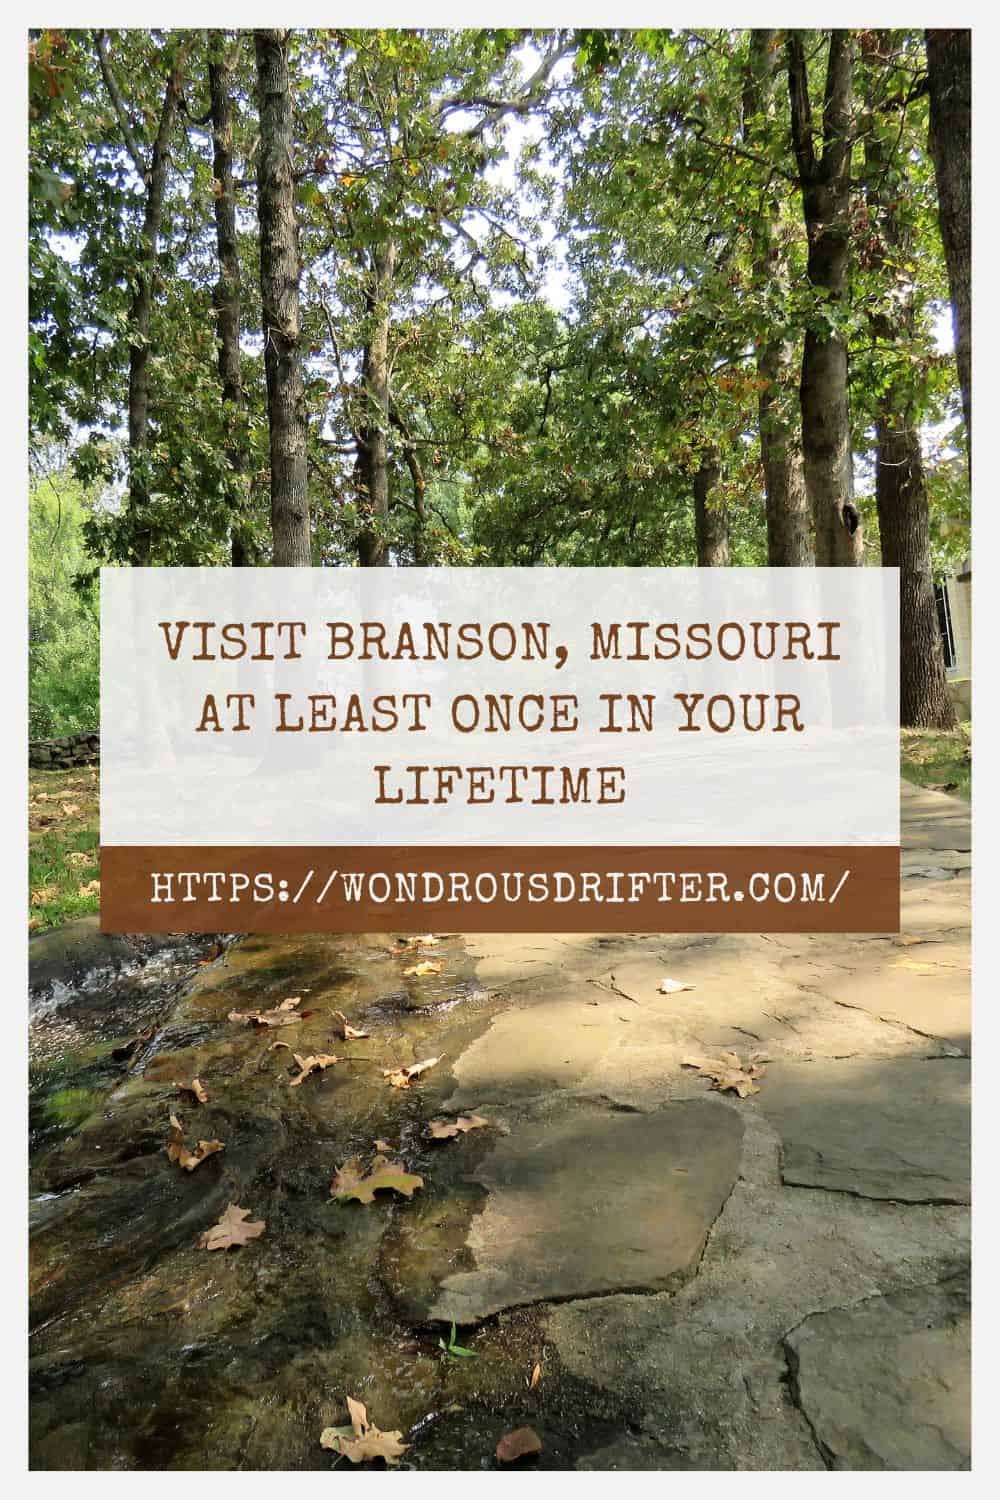 Visit Branson Missouri at least once in your lifetime